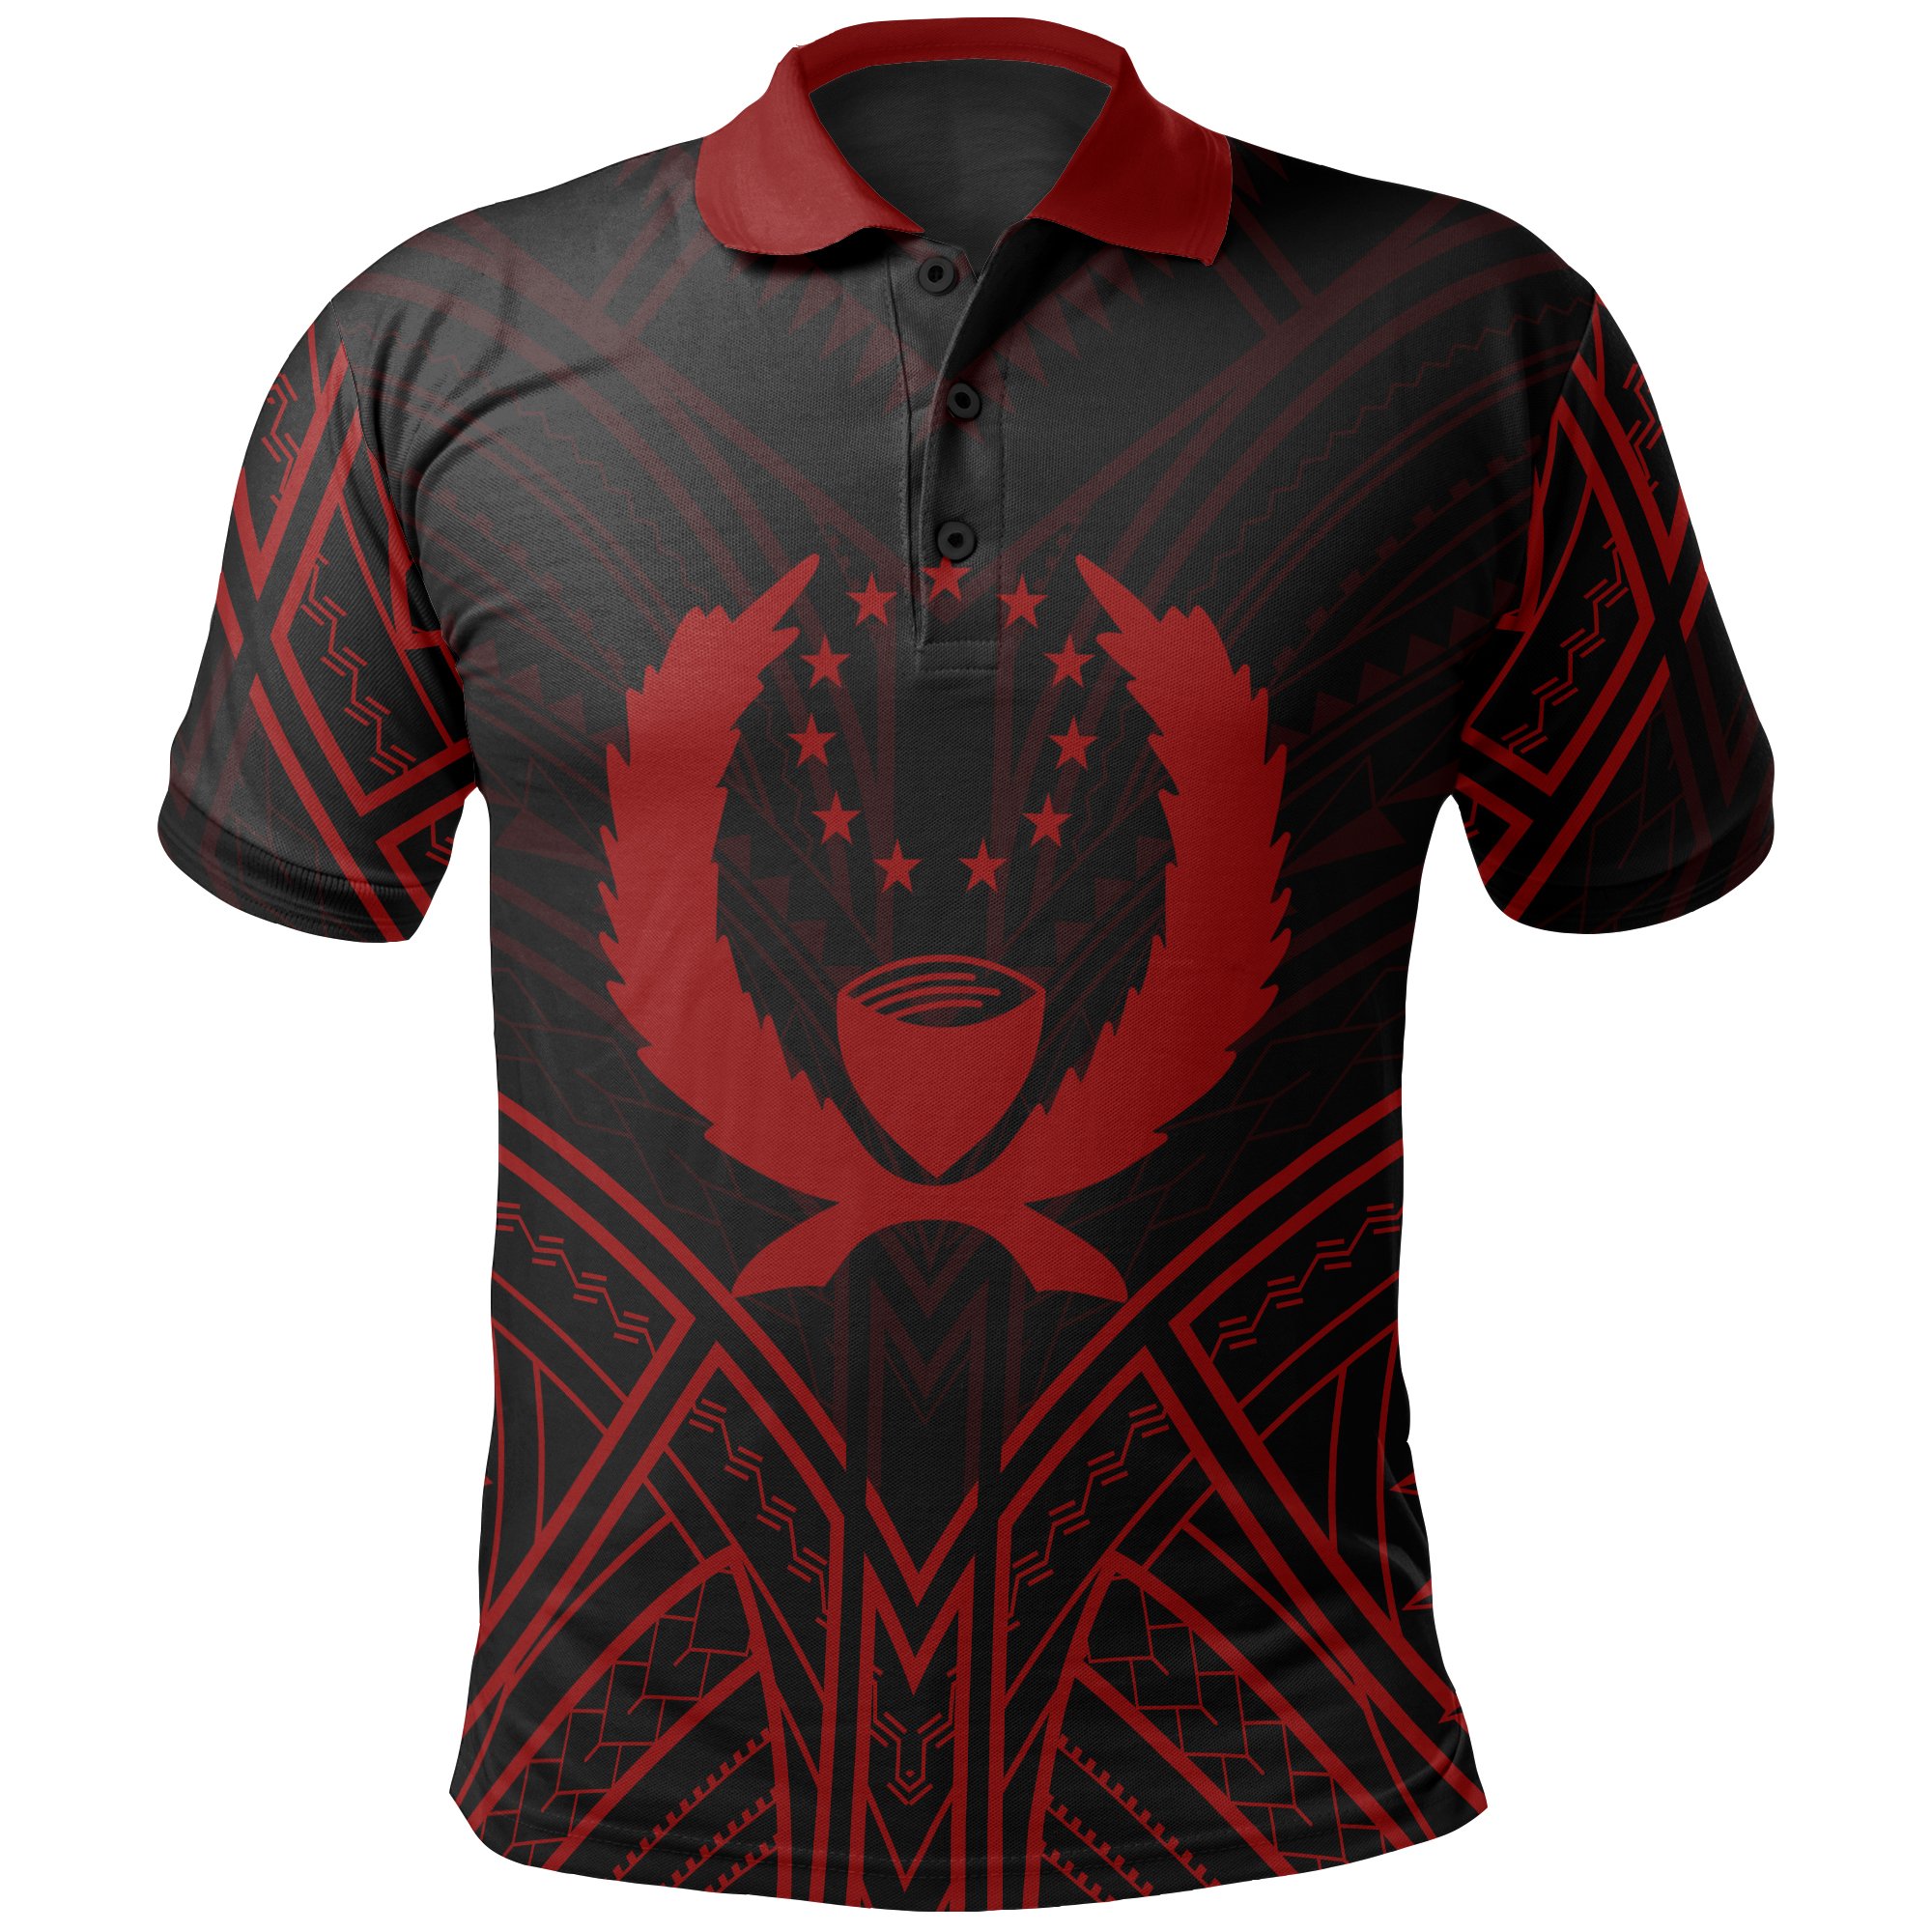 Pohnpei State Polo Shirt - Pohnpei State Seal Red Tribal Patterns - BN01